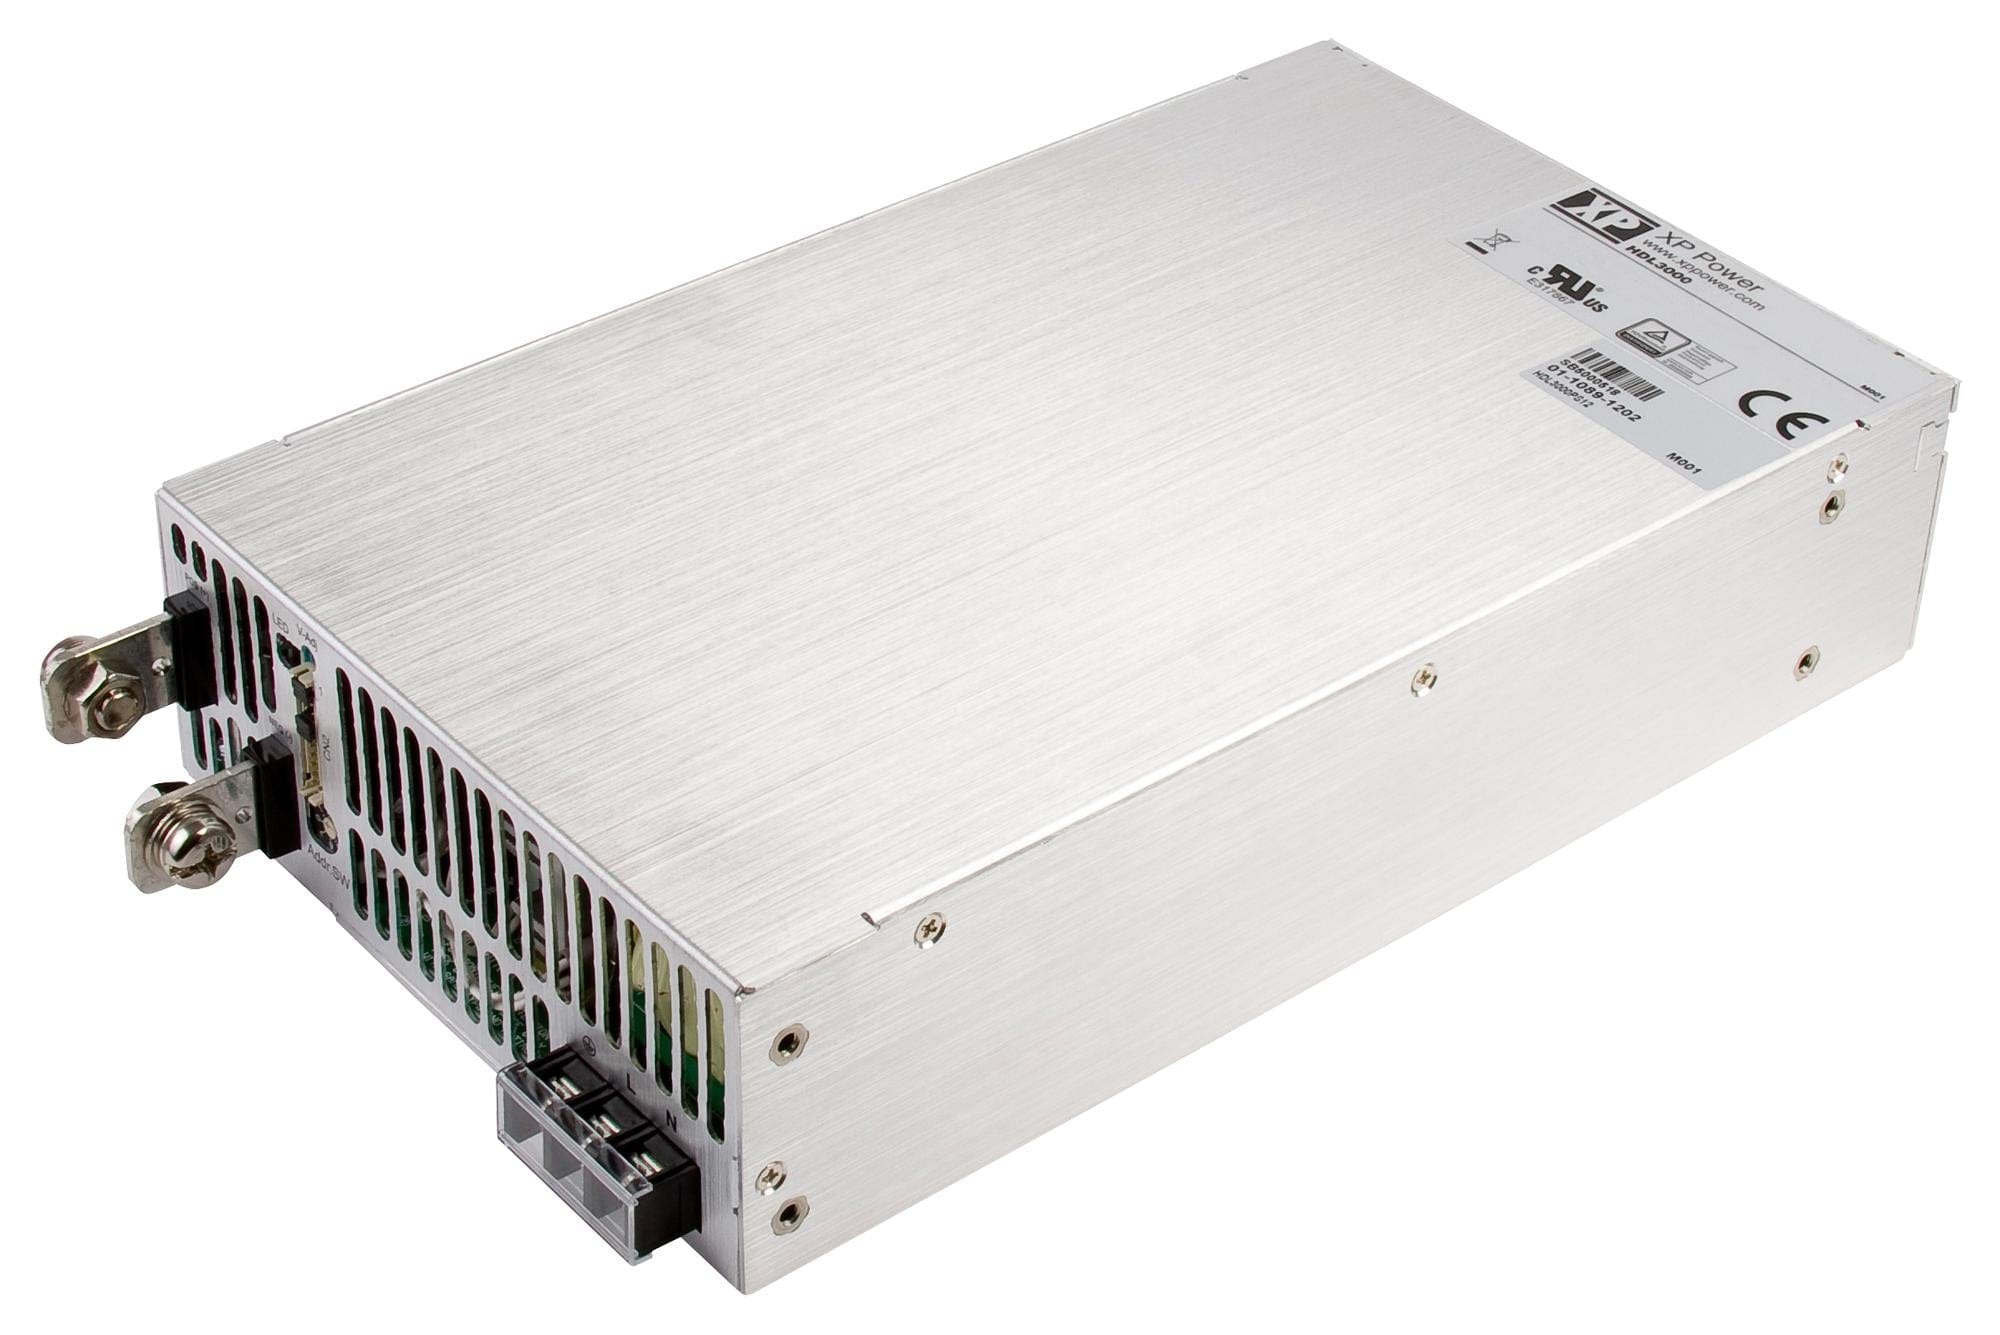 XP POWER Enclosed - Single Output HDL3000PS36 POWER SUPPLY, AC-DC, 36V, 83.5A XP POWER 3524109 HDL3000PS36